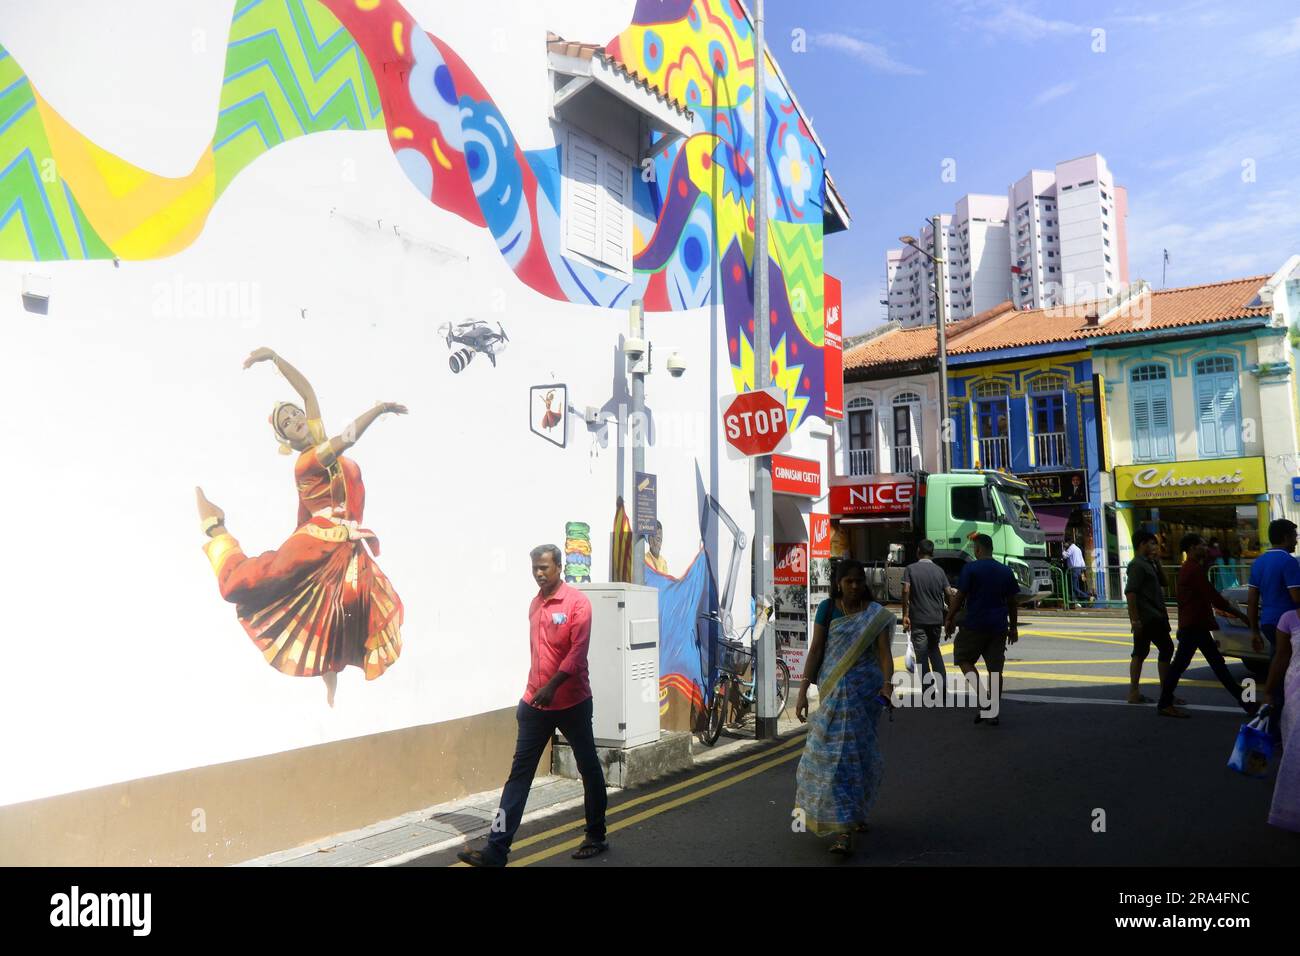 Art mural of woman in sari dancing whilst being surveilled by a drone, Little India, Singapore. No MR or PR Stock Photo